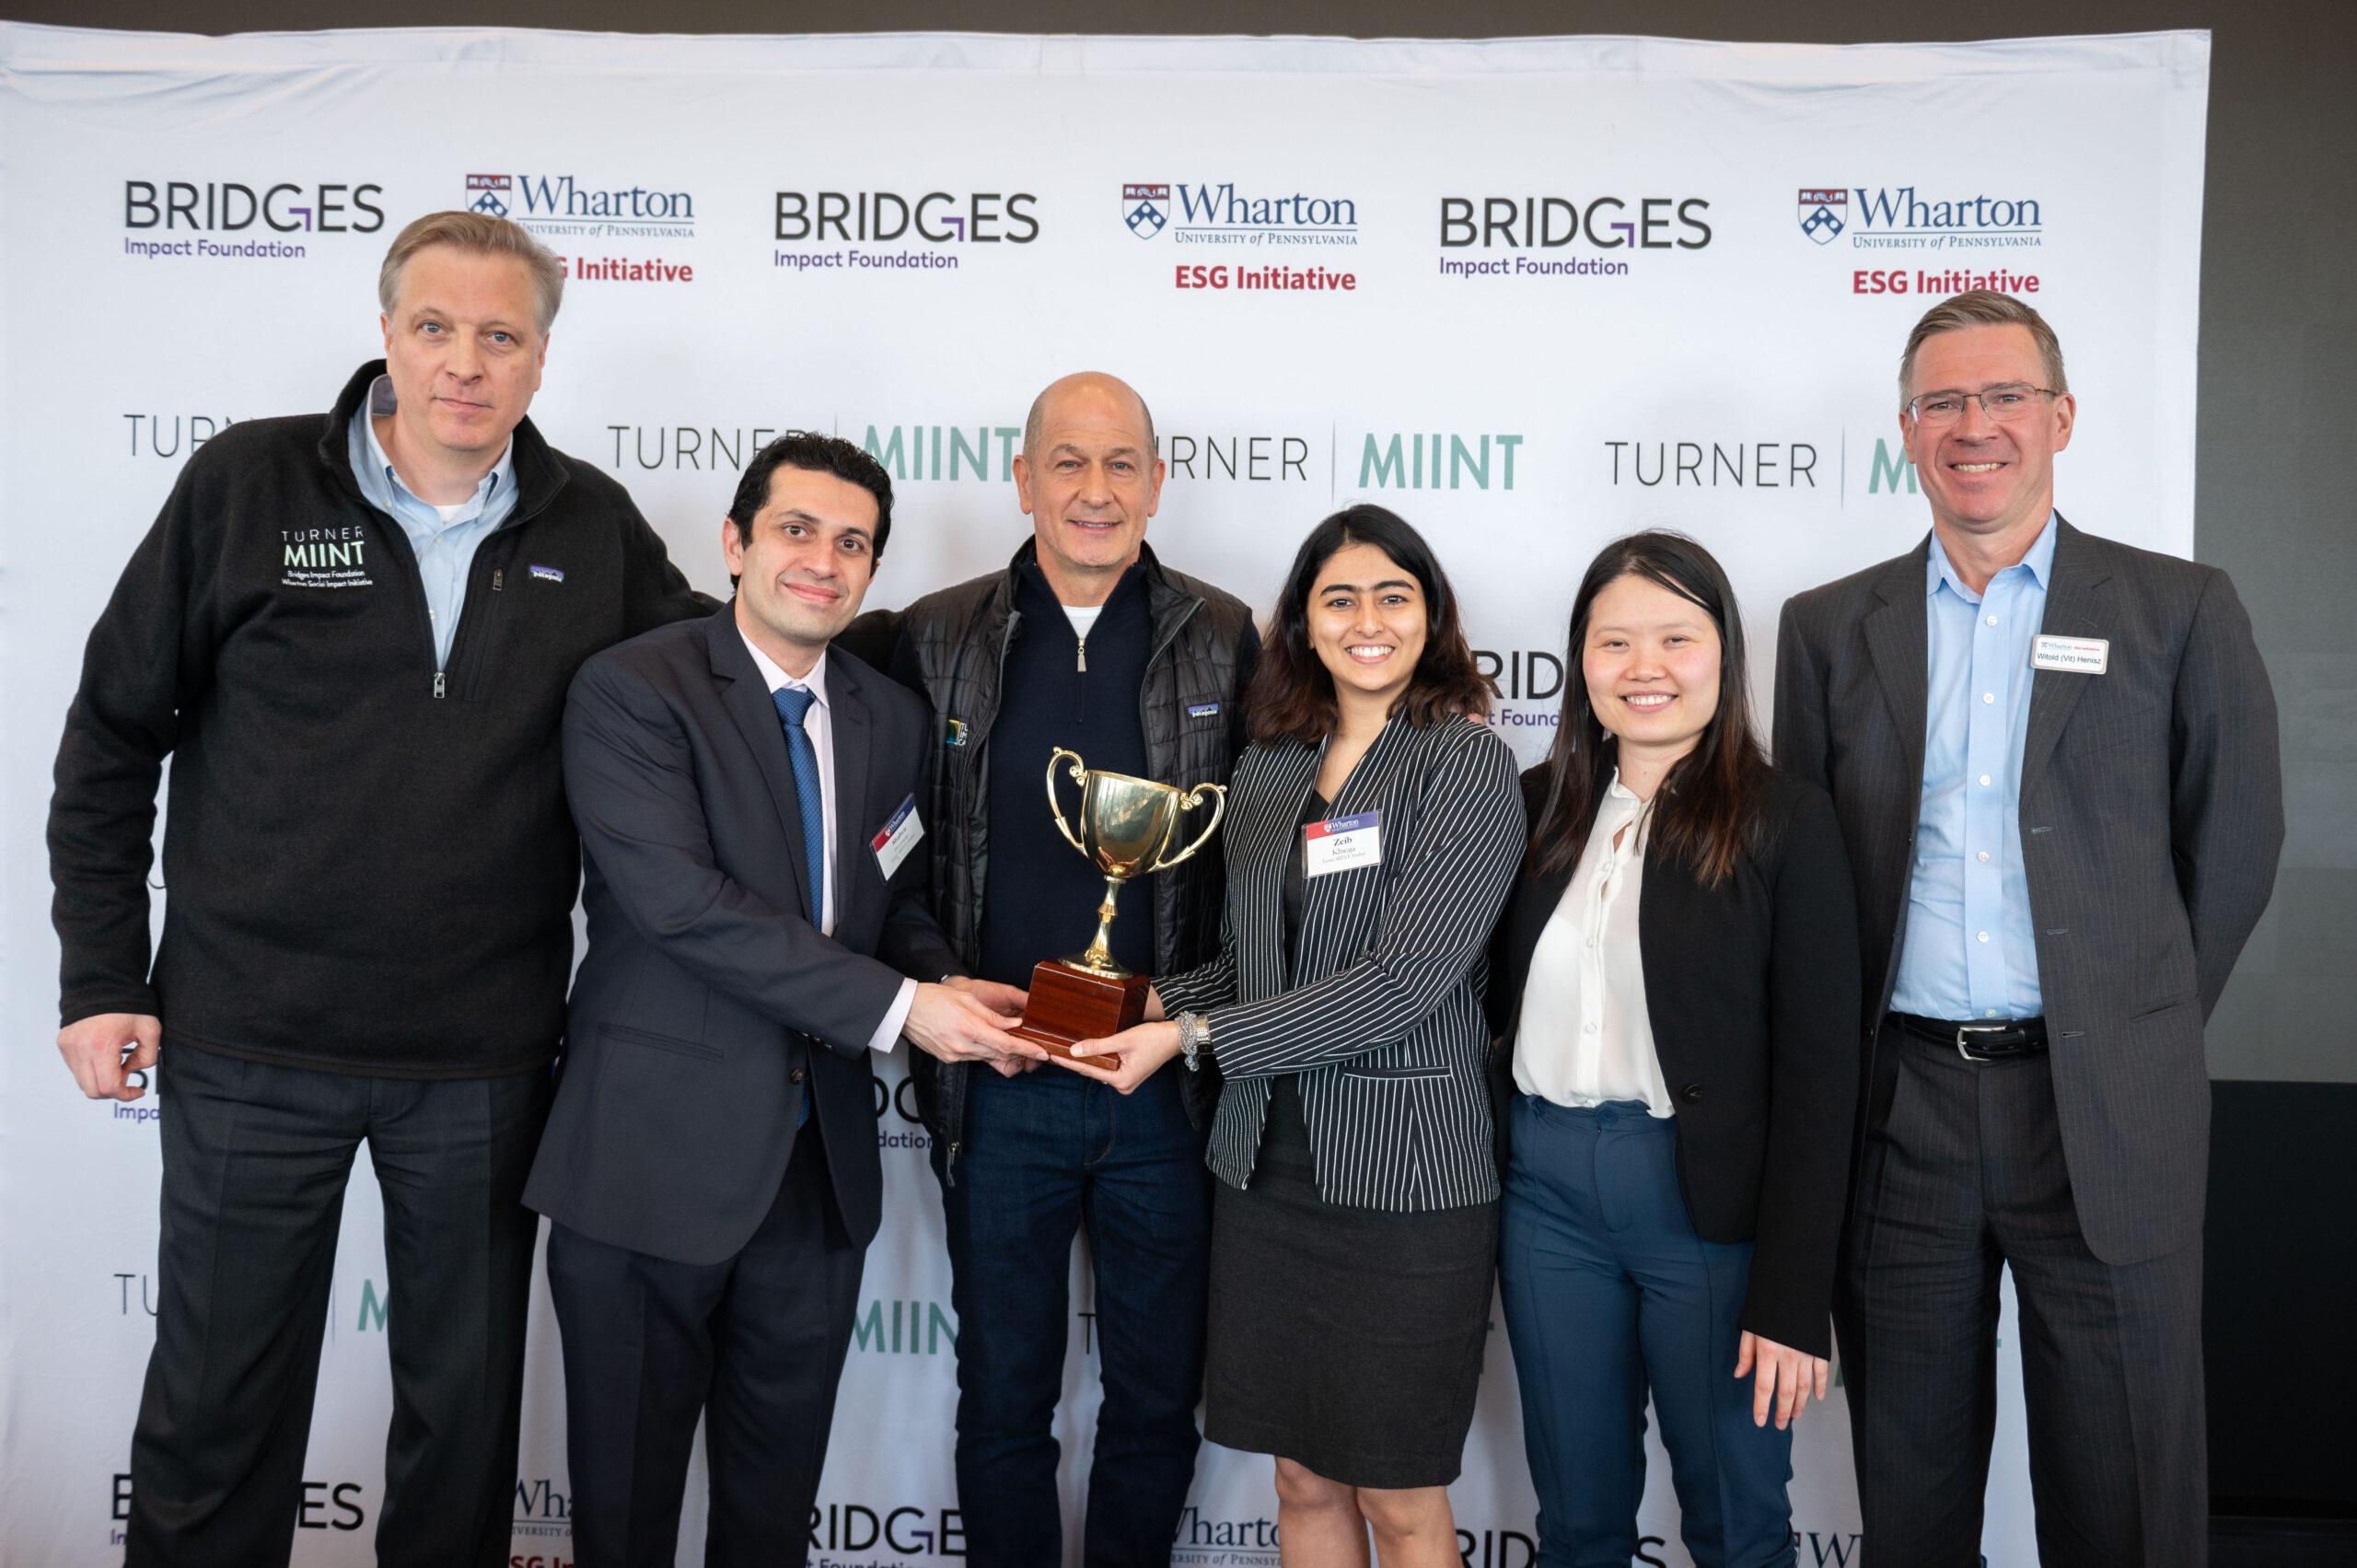 The London Business School team posed with the TMIINT trophy, Brian Trelstad, Bobby Turner, and Witold Henisz.